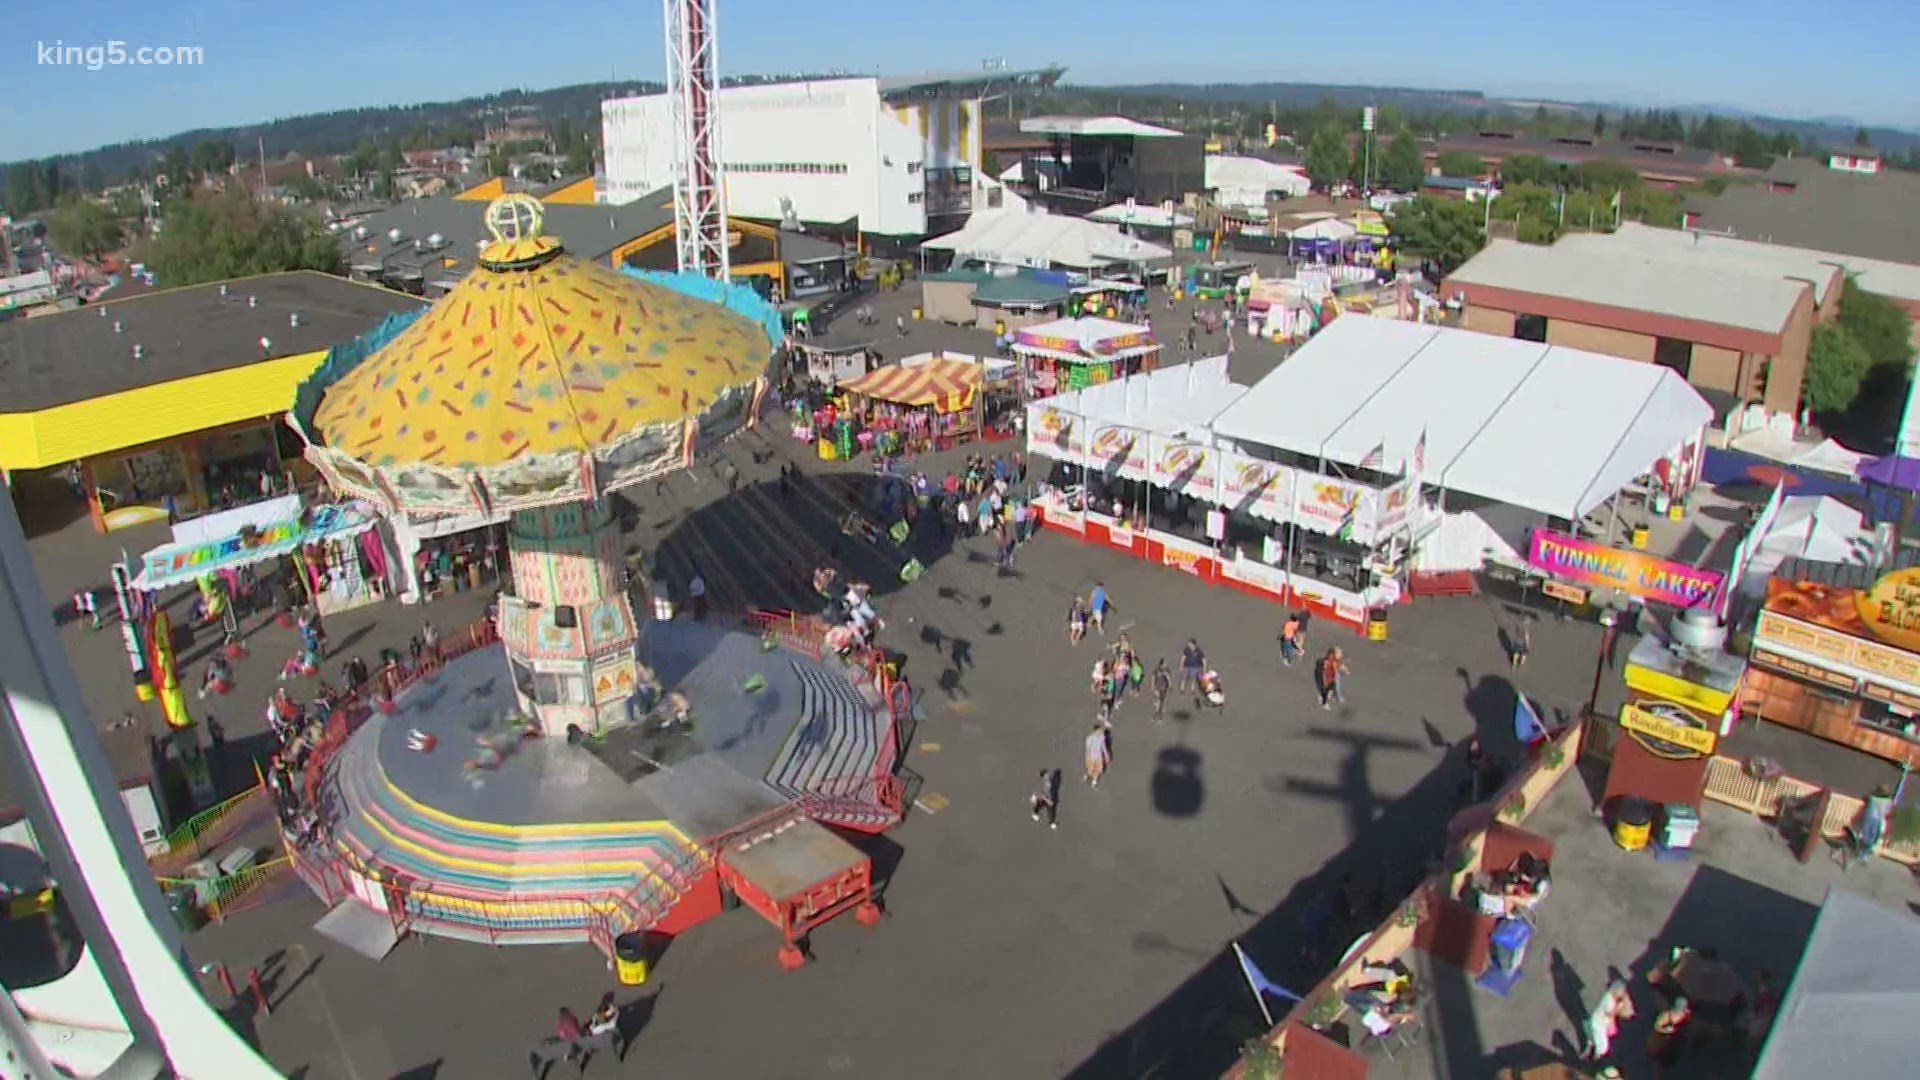 The annual Washington State Fair held in Puyallup was canceled for the first time in 80 years due to coronavirus concerns.